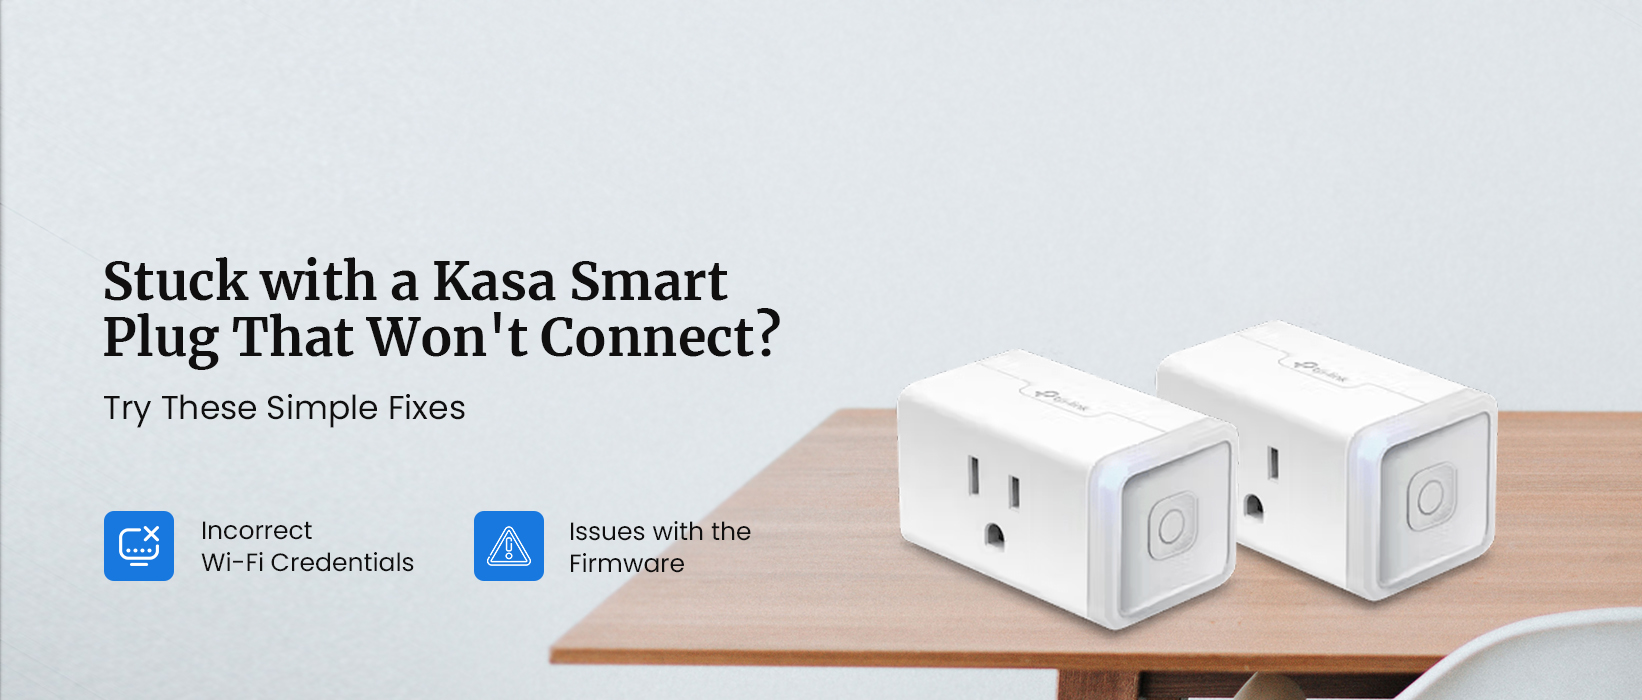 Kasa Smart Plug Not Connecting. How to Fix it